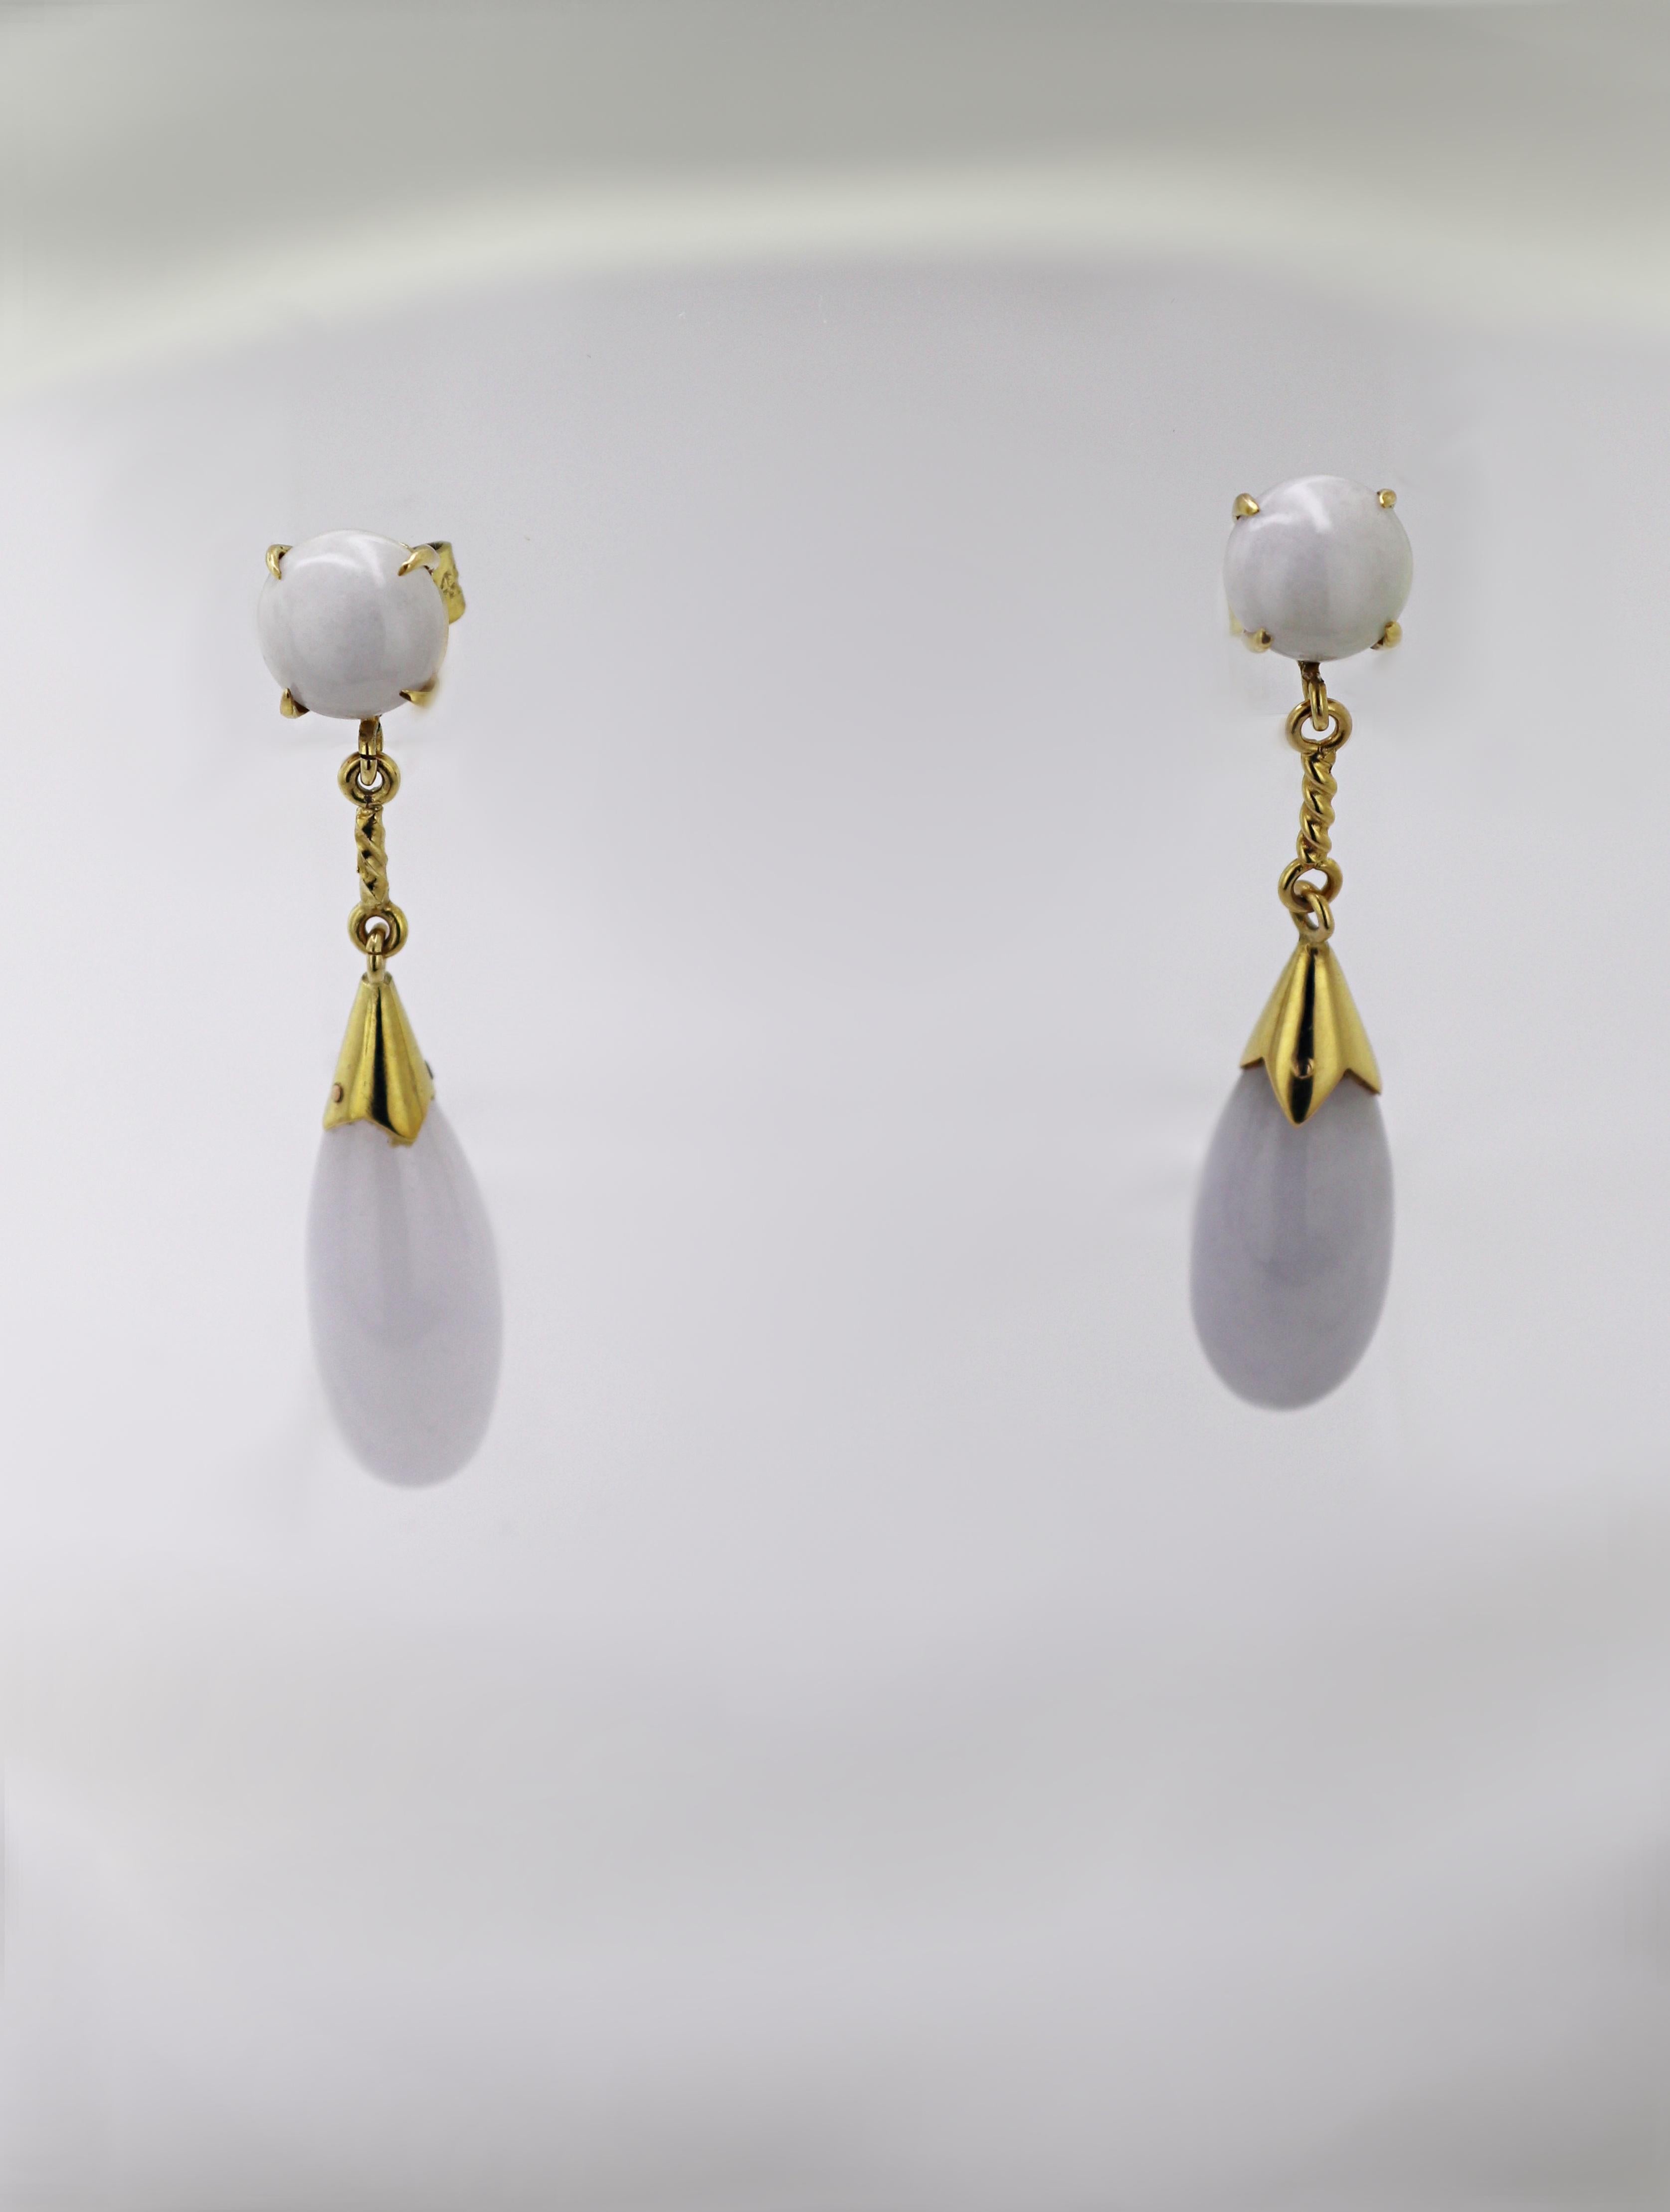 Cabochon Natural “A” Jadeite Jade Mason Kay Report Certified, Yellow Gold Drop Earrings For Sale